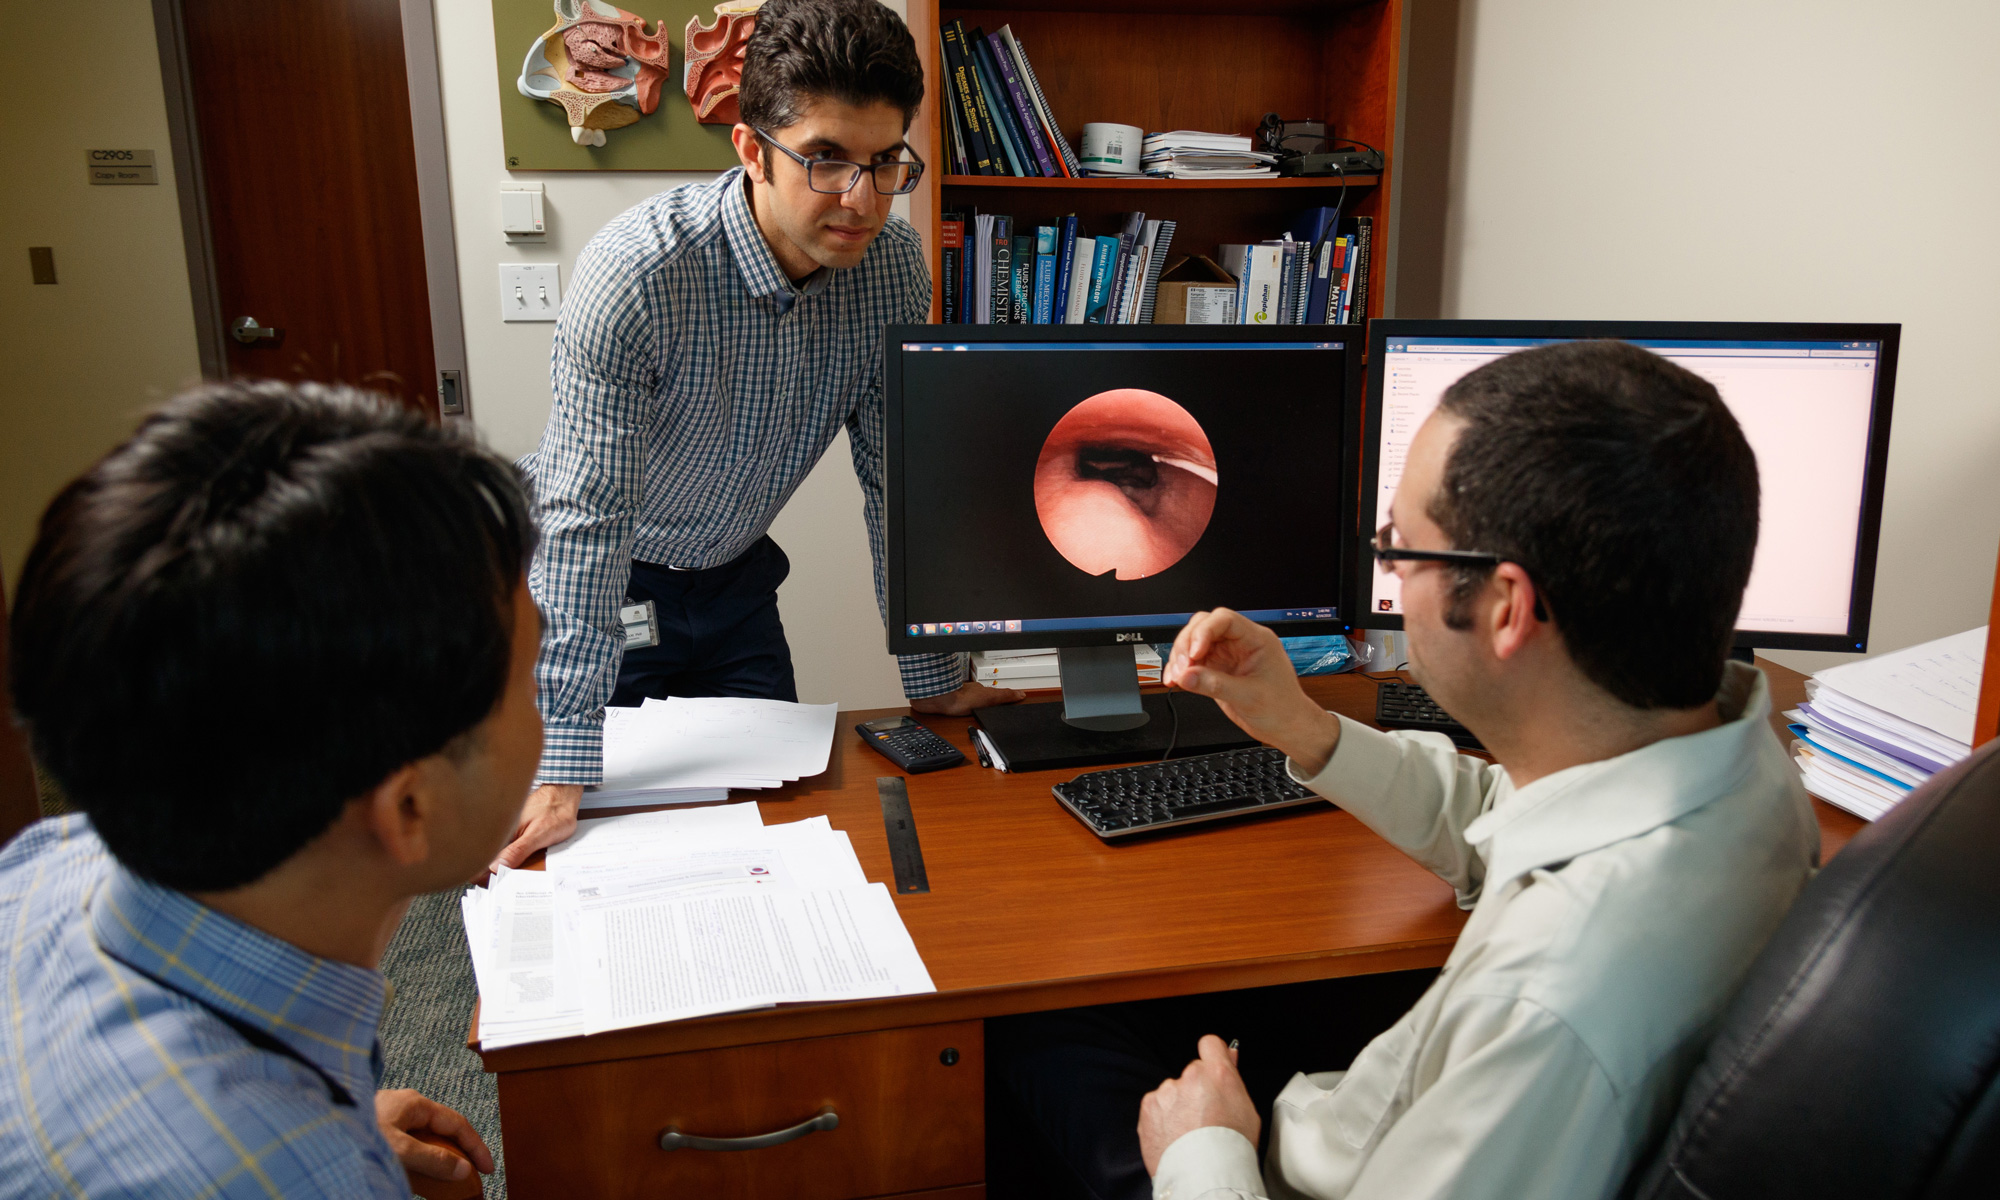 Dr. Guilherme Garcia discussing with students at computer in Airway Biomechanics Laboratory..